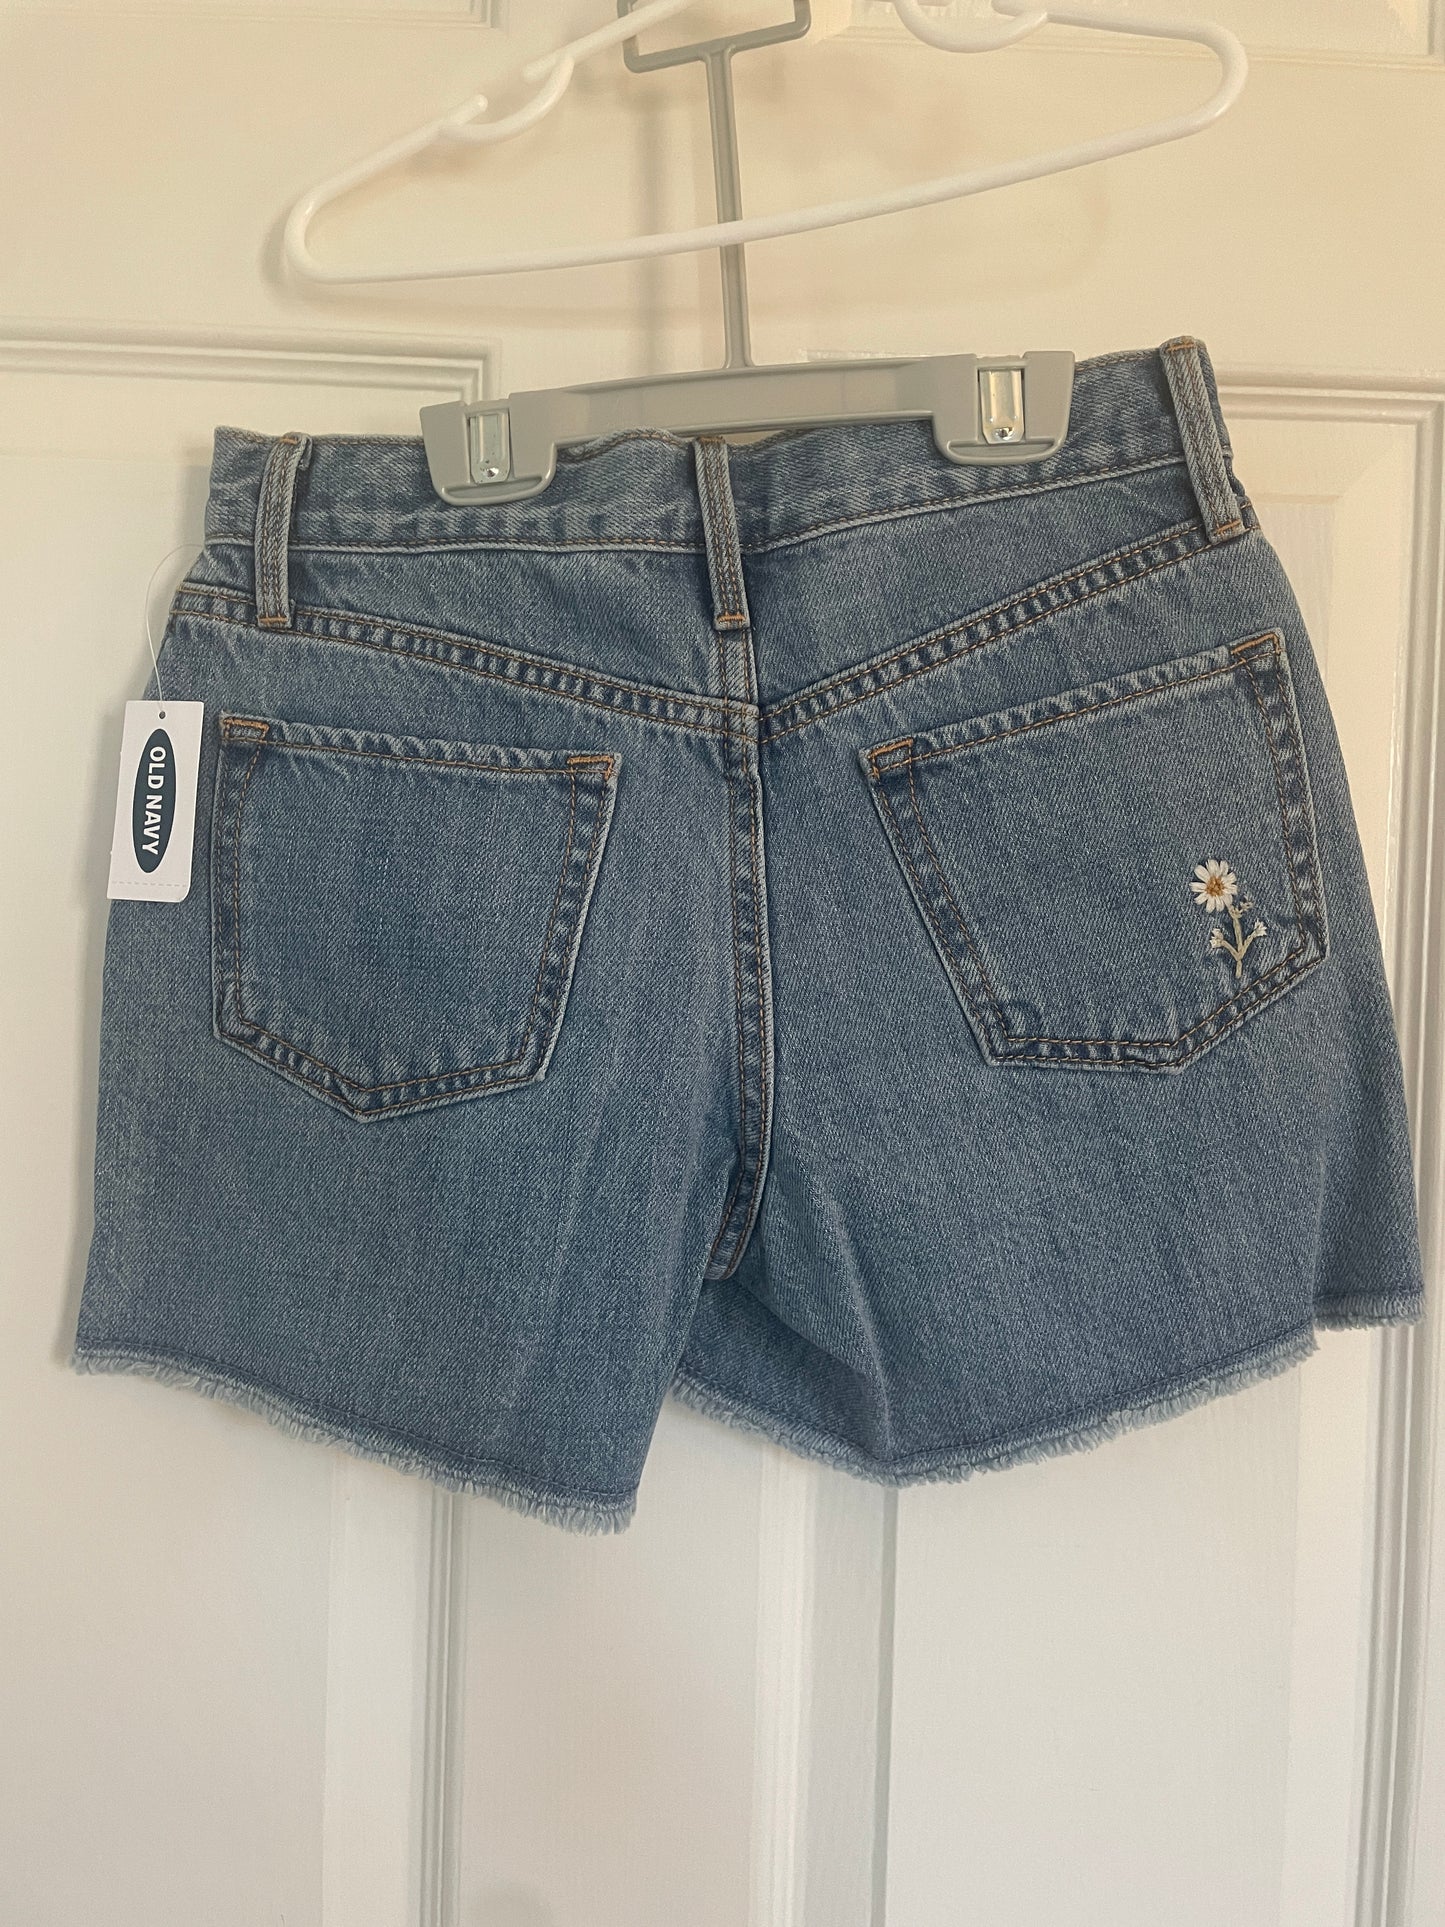 Girls NWT Old Navy Jean Shorts Size 10